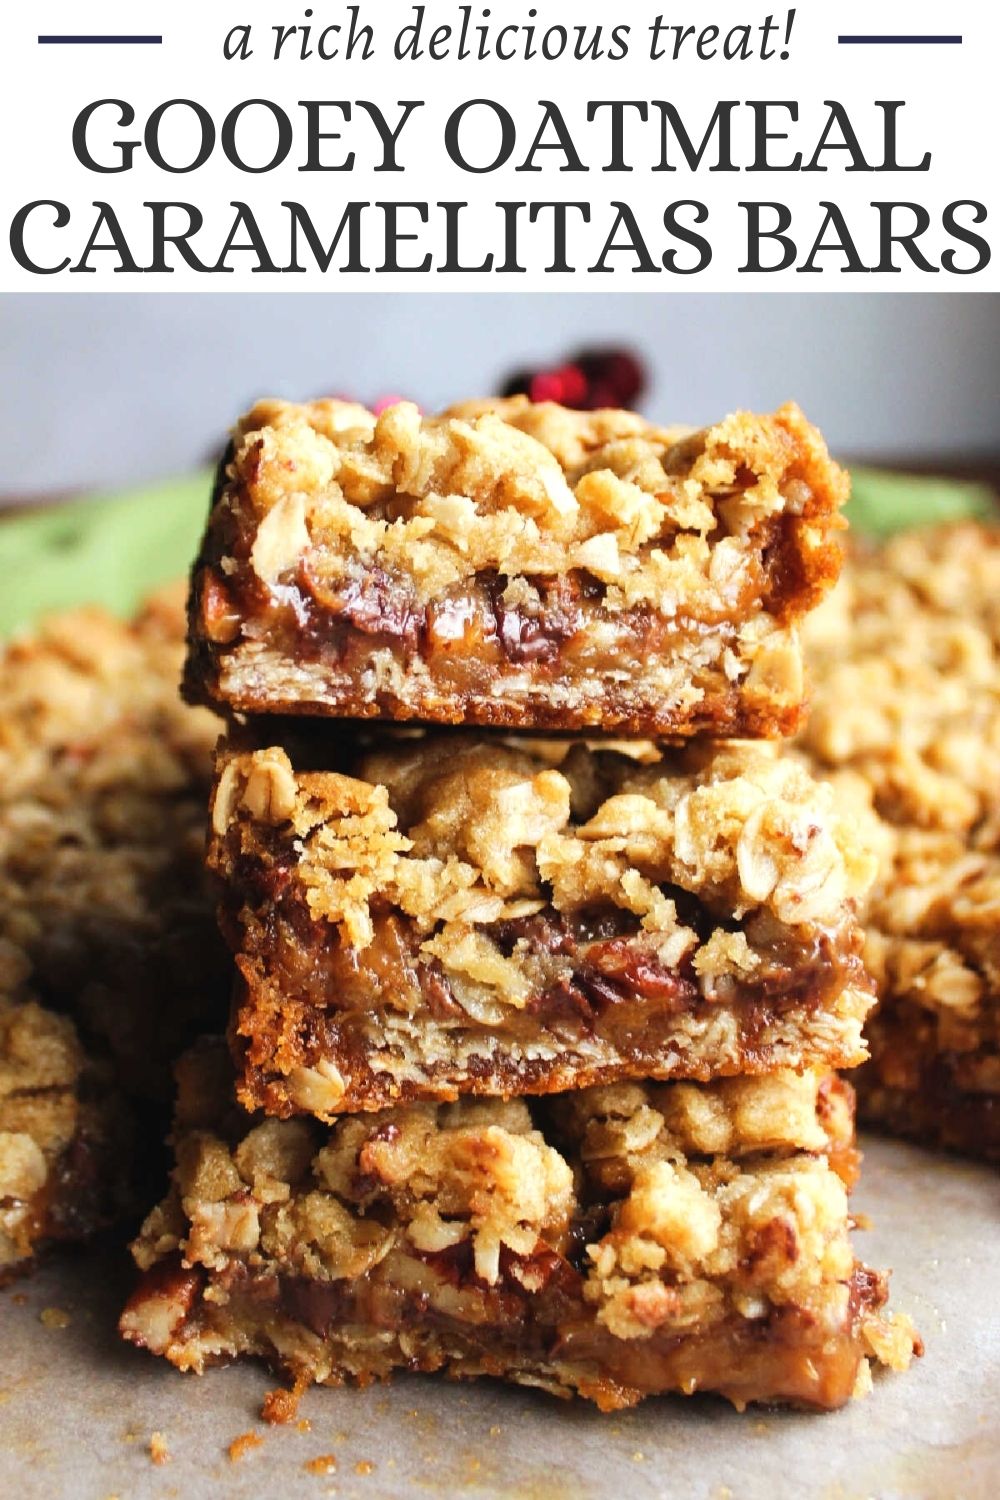 These gooey bars are the perfect mix of oatmeal, pecans, chocolate and caramel. They are easy to put together and taste amazing. Warm them up in the microwave for a few seconds for an extra gooey and decadent experience.